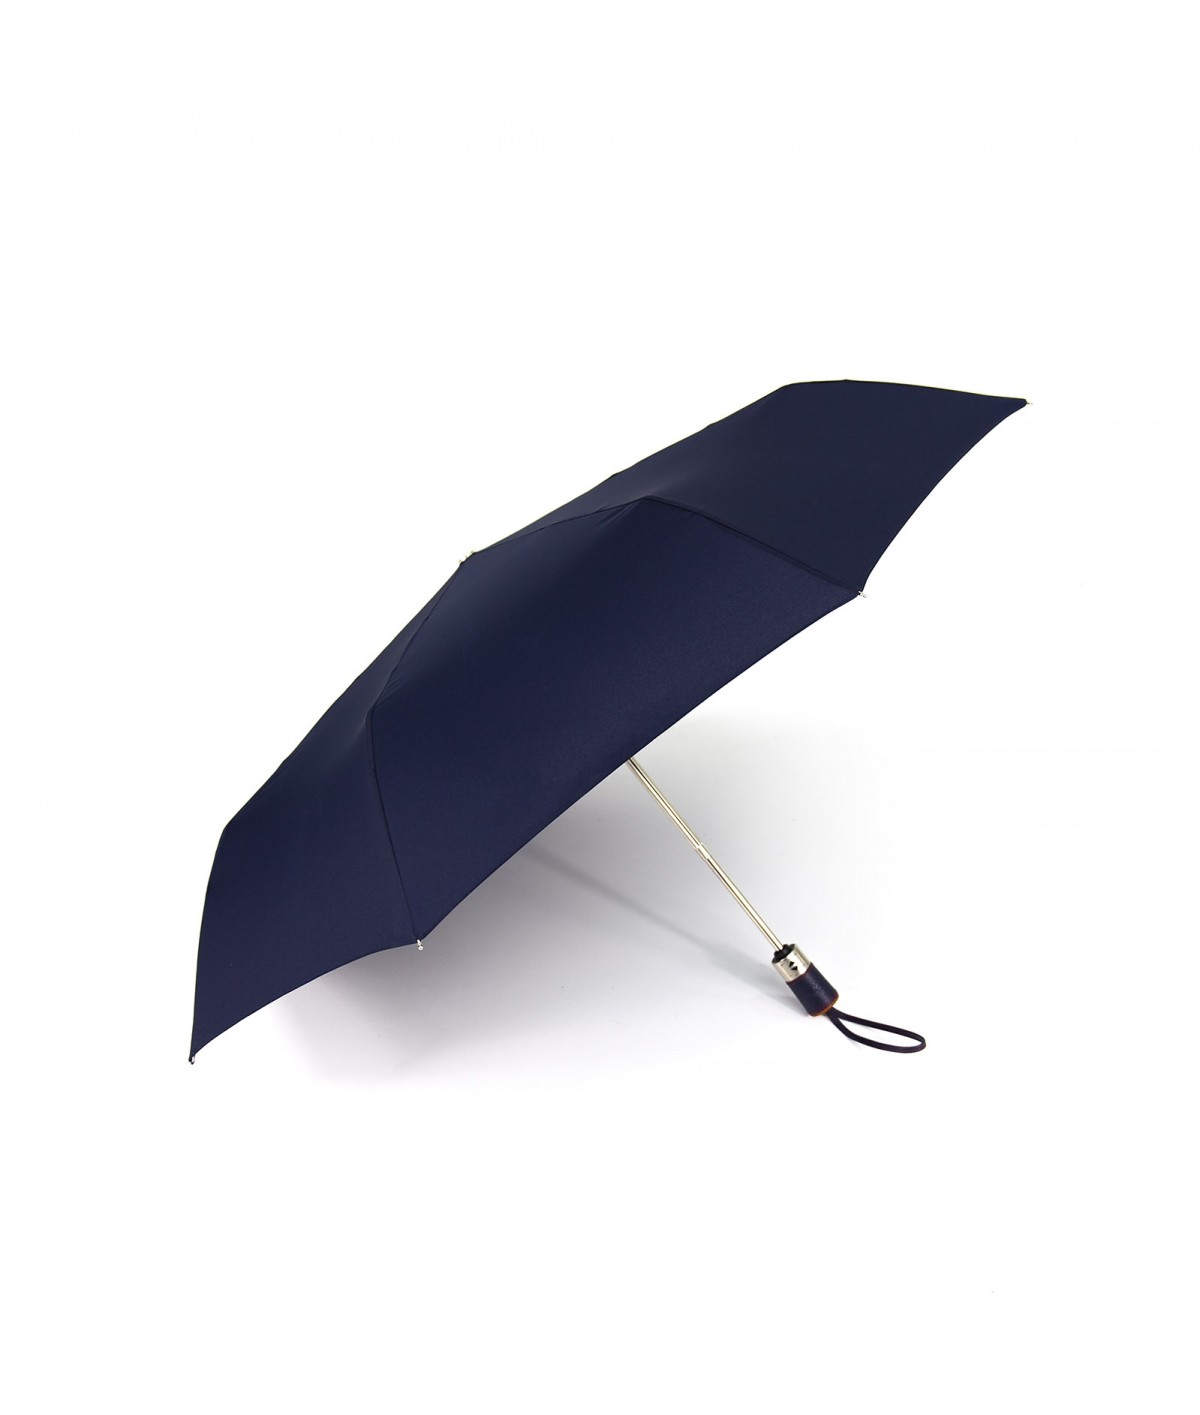 → Longchamp Umbrella "Club Folding" - Navy - Automatic Opening/Closing by the French Umbrella Manufacturer Maison Pierre Vaux